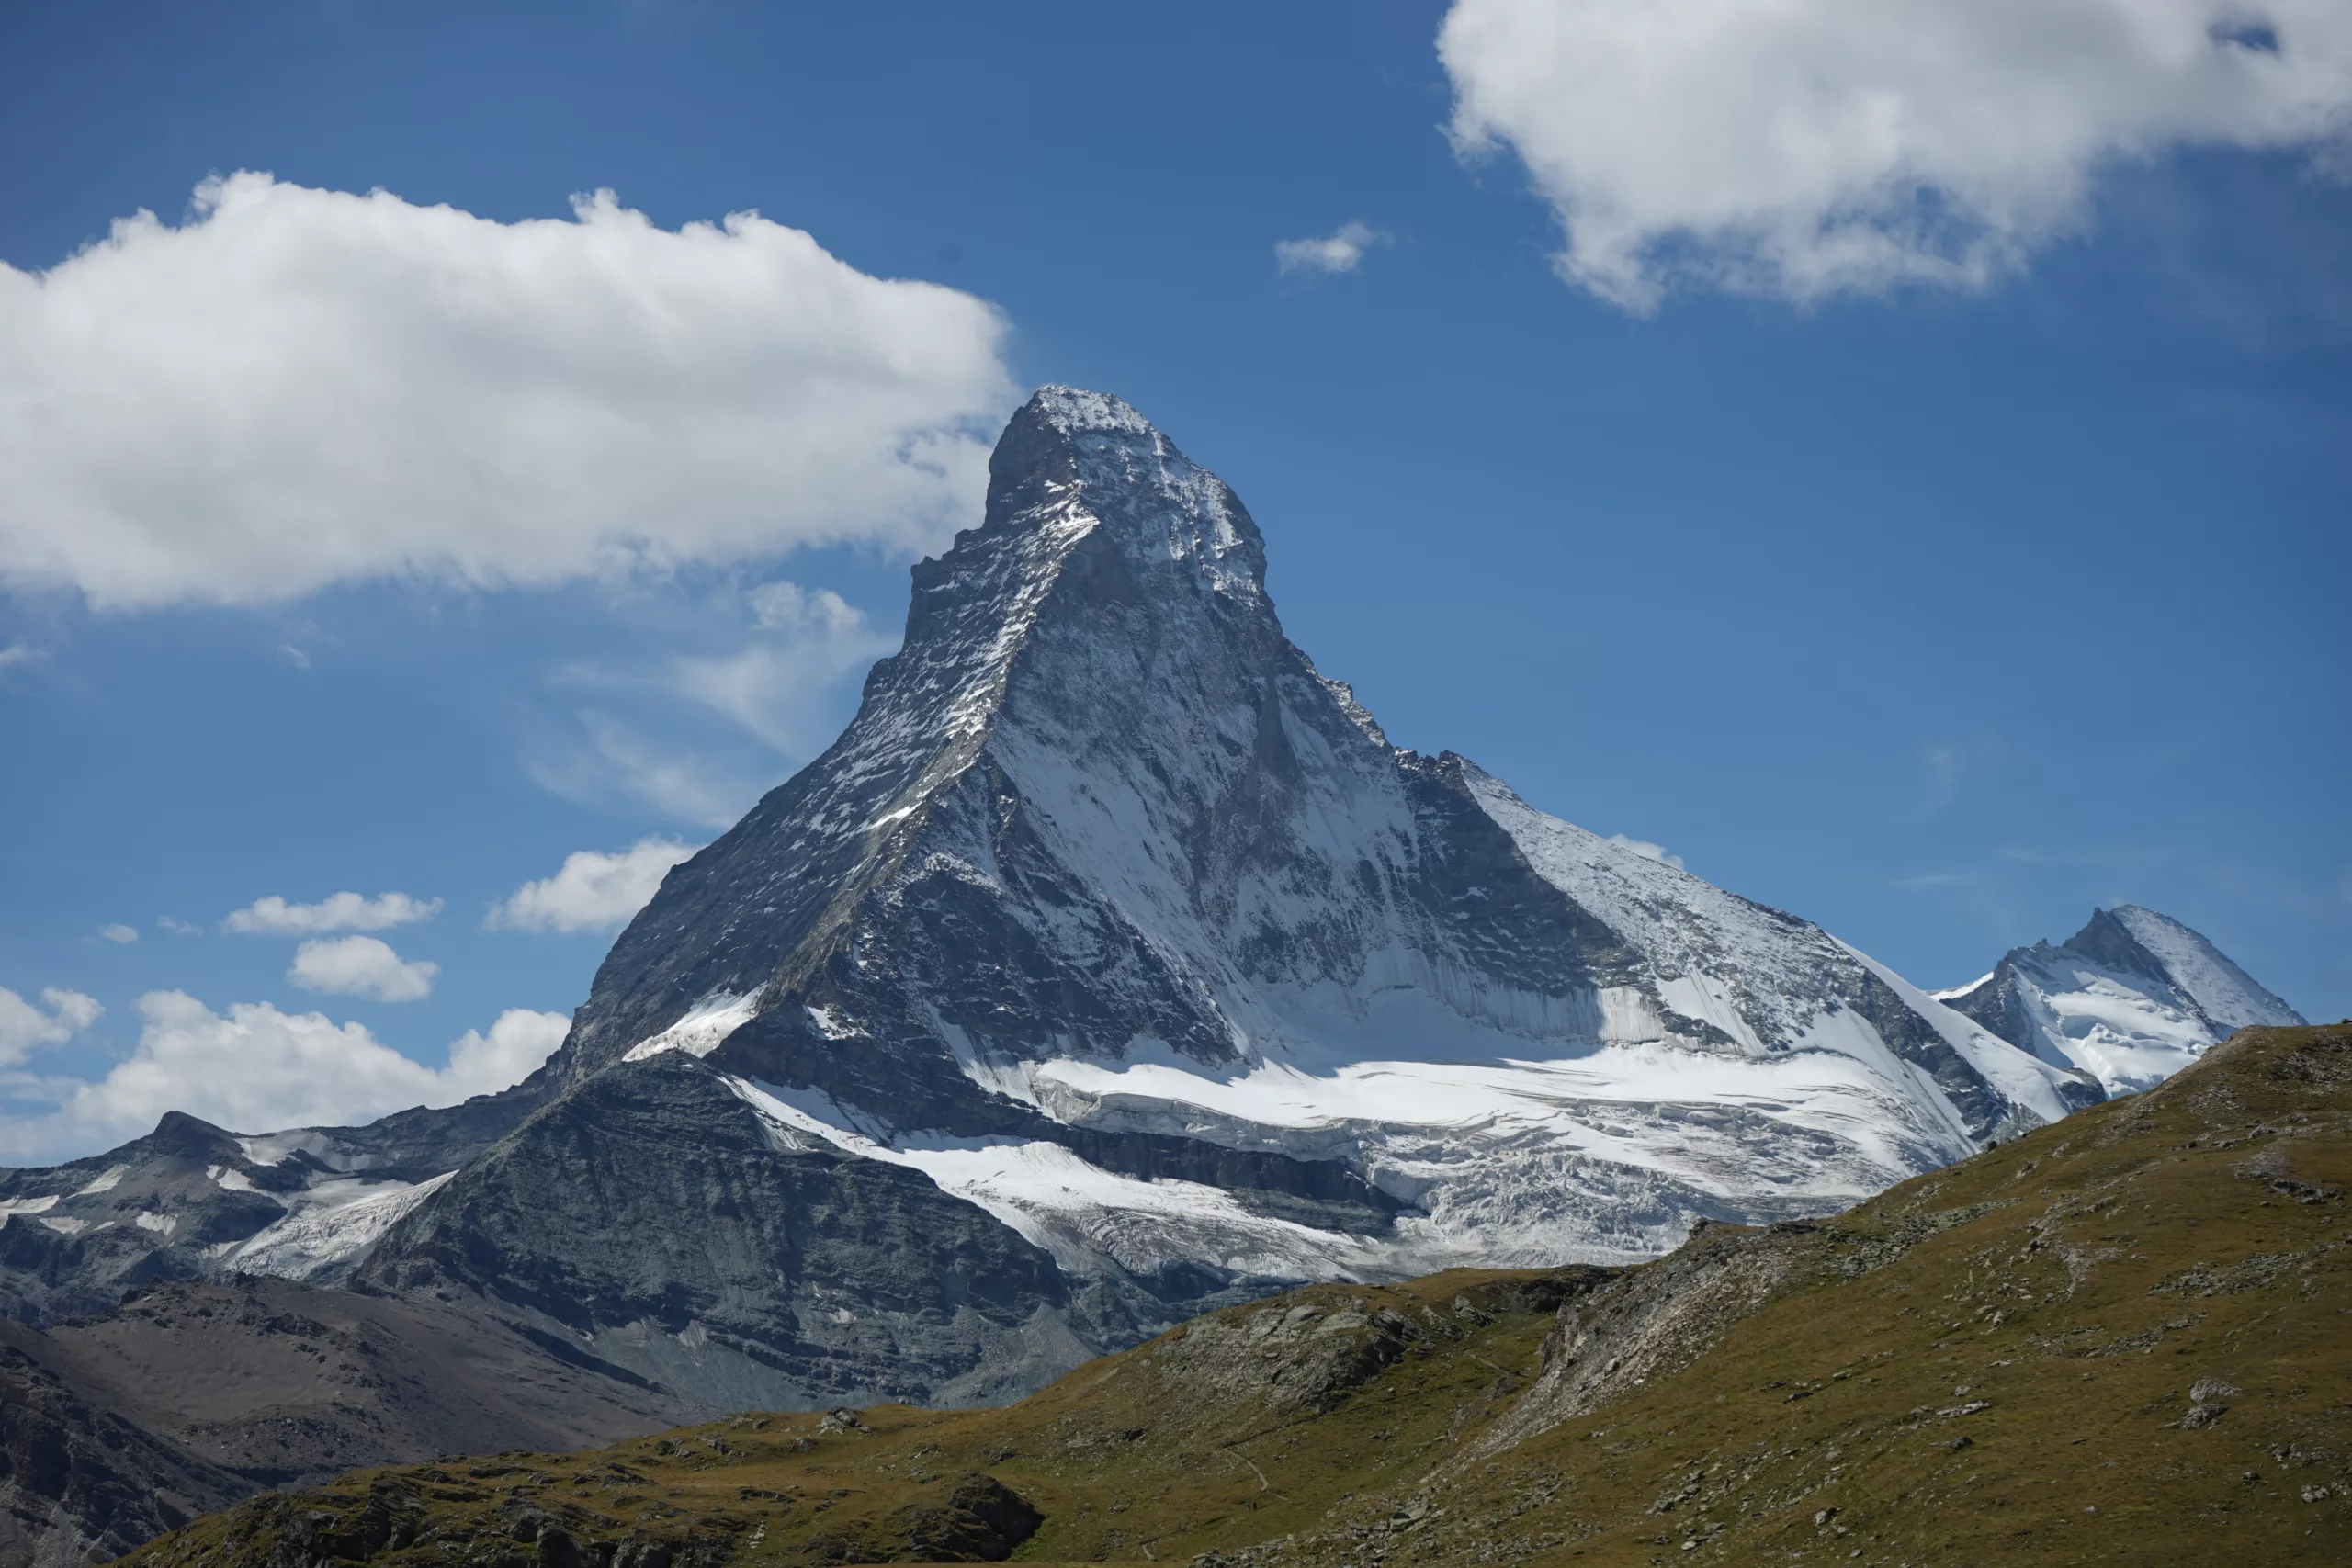 The ultimate thrilling view of the Matterhorn, Switzerland